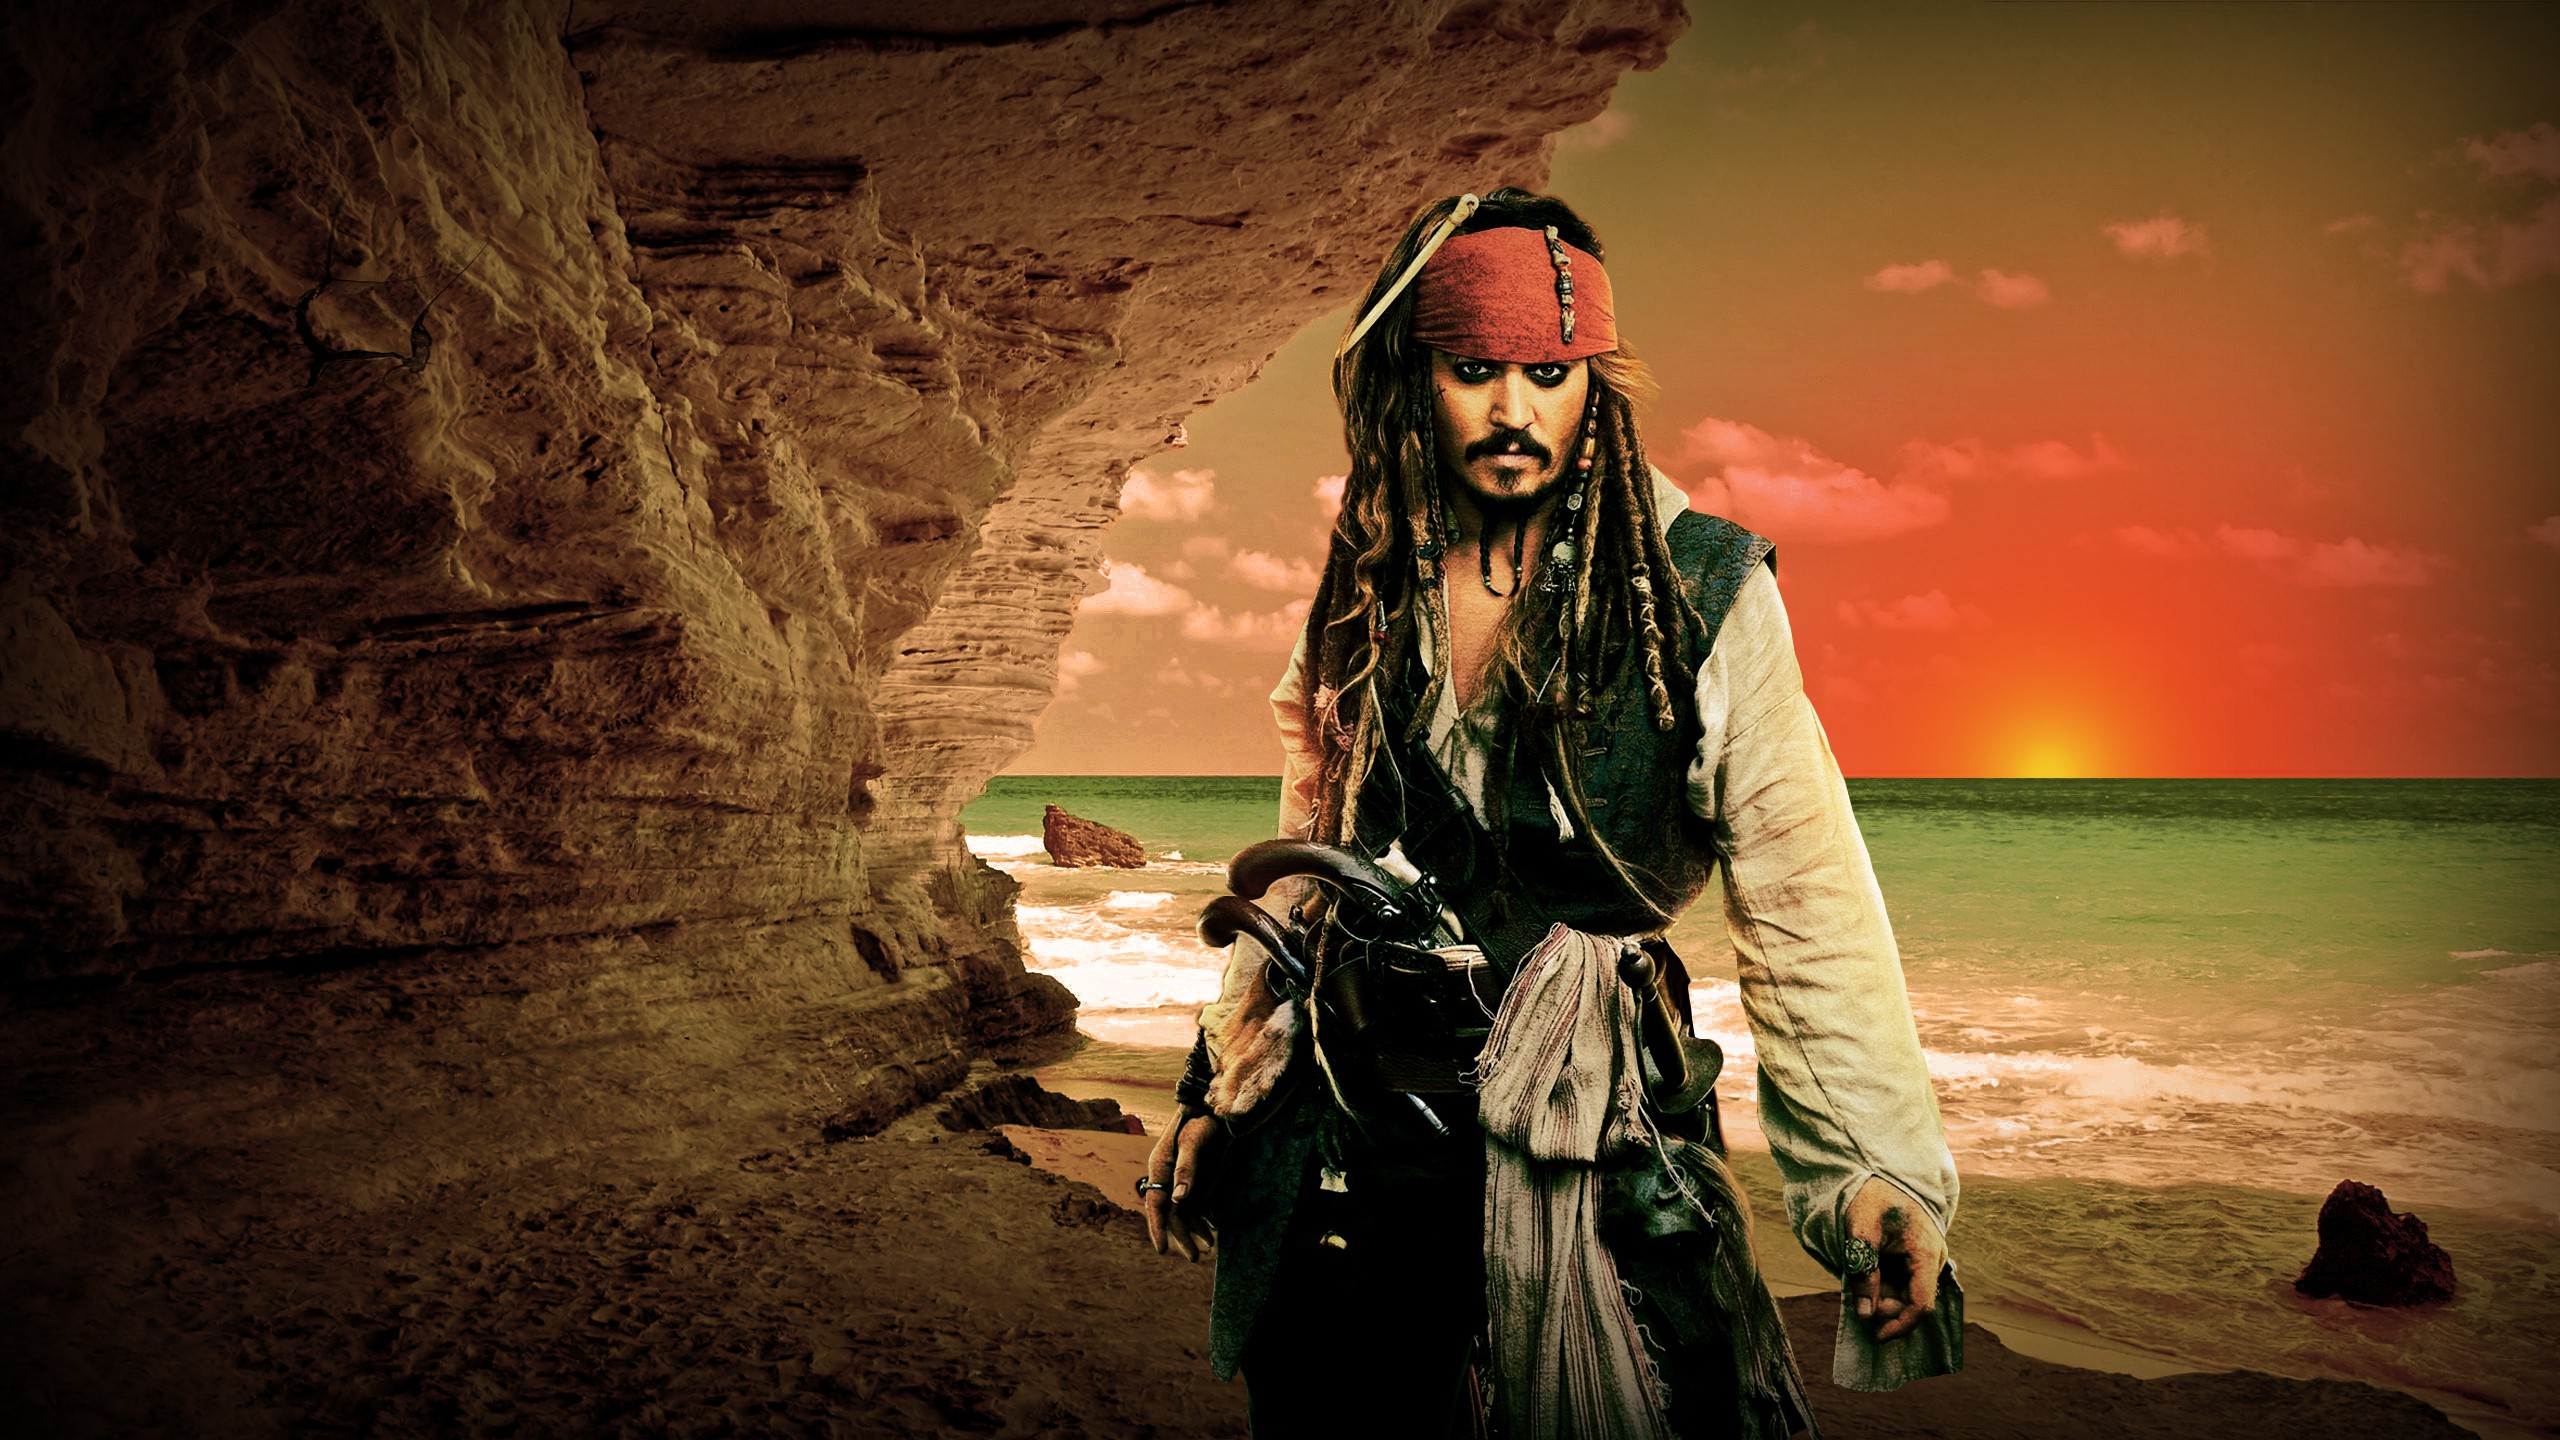 Pirates of the Caribbean 1 full movie to download in hd